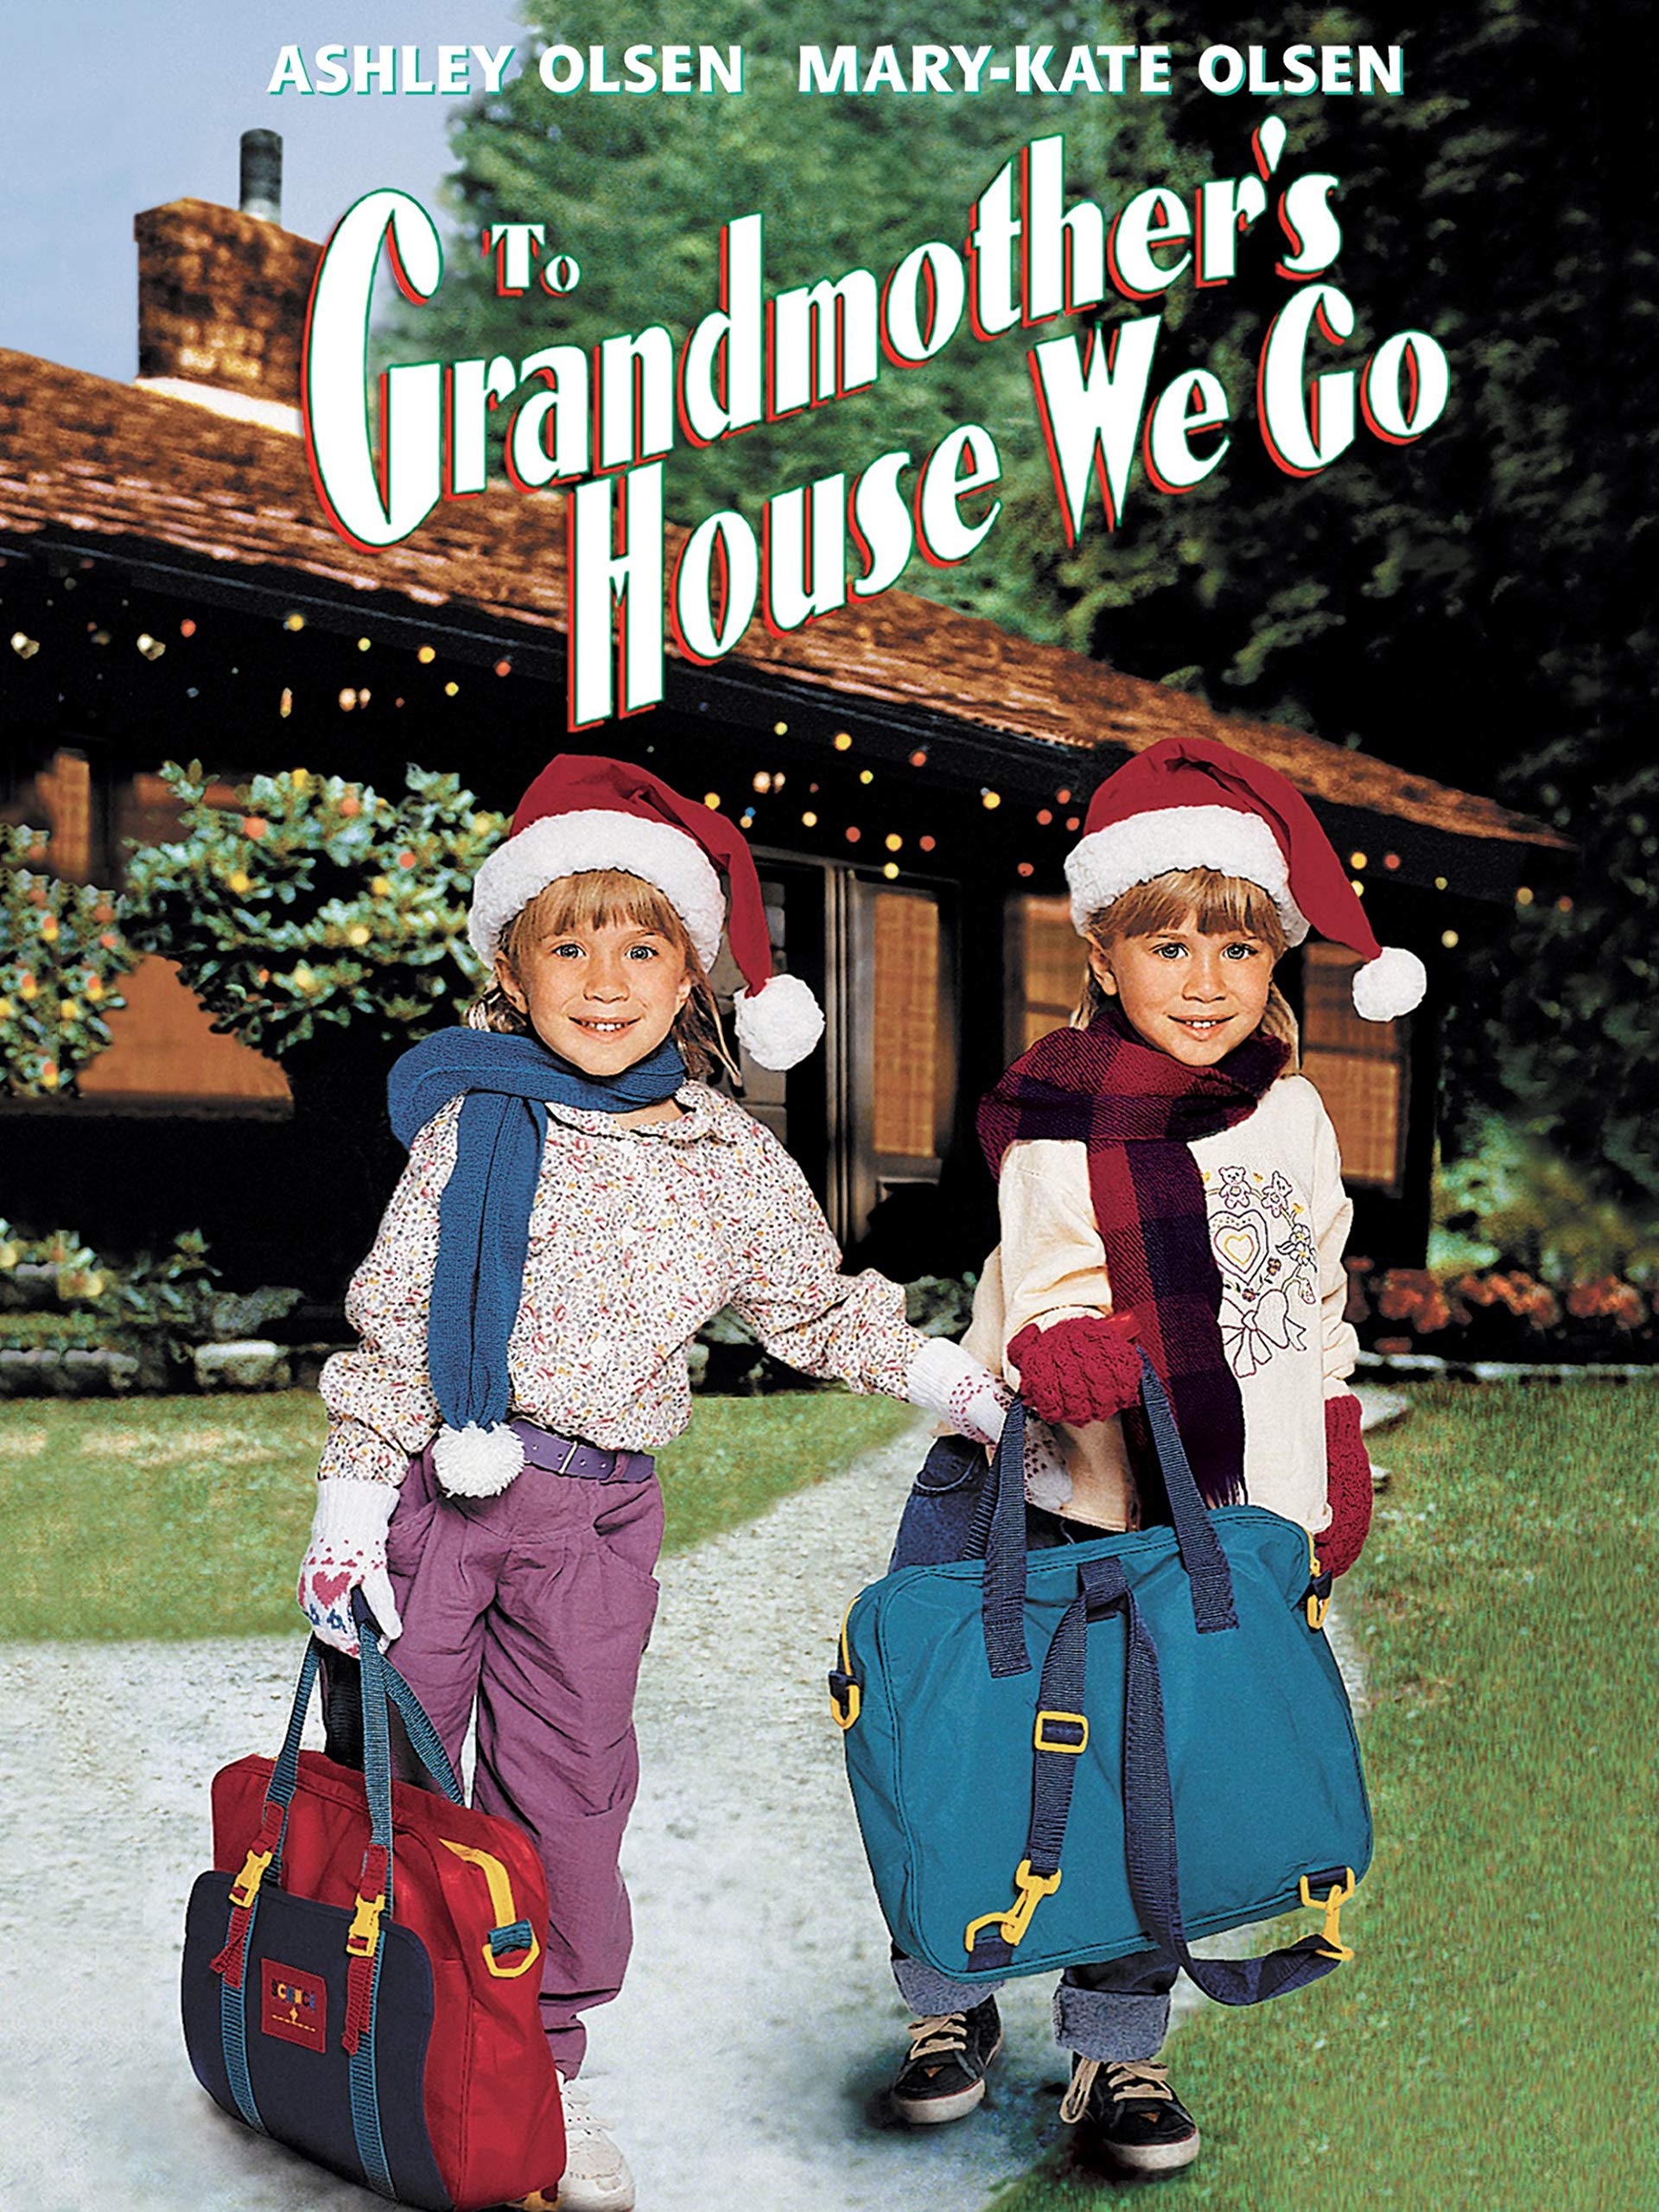 To Grandmother's House We Go: An Olsen twins' '90s TV movie where they play separate characters. This adventure-packed story follows the kids on a wild journey to grandma's house in a delivery truck, delivering sweet, nostalgic entertainment.